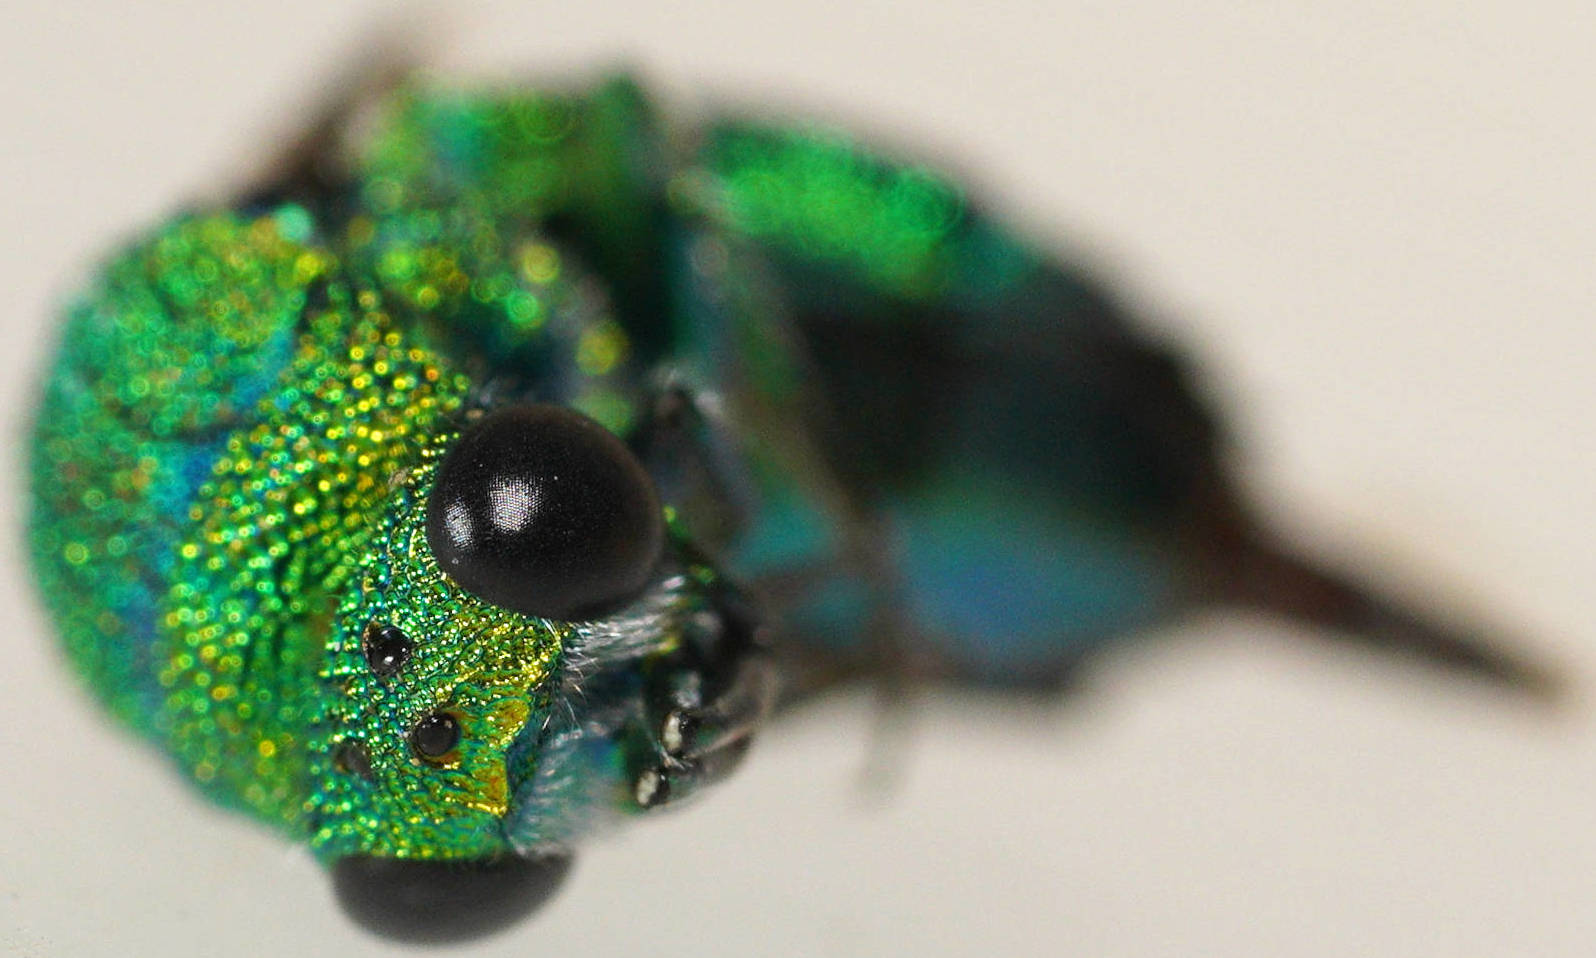 Seven-toothed Cuckoo Wasp (Chrysis festina)